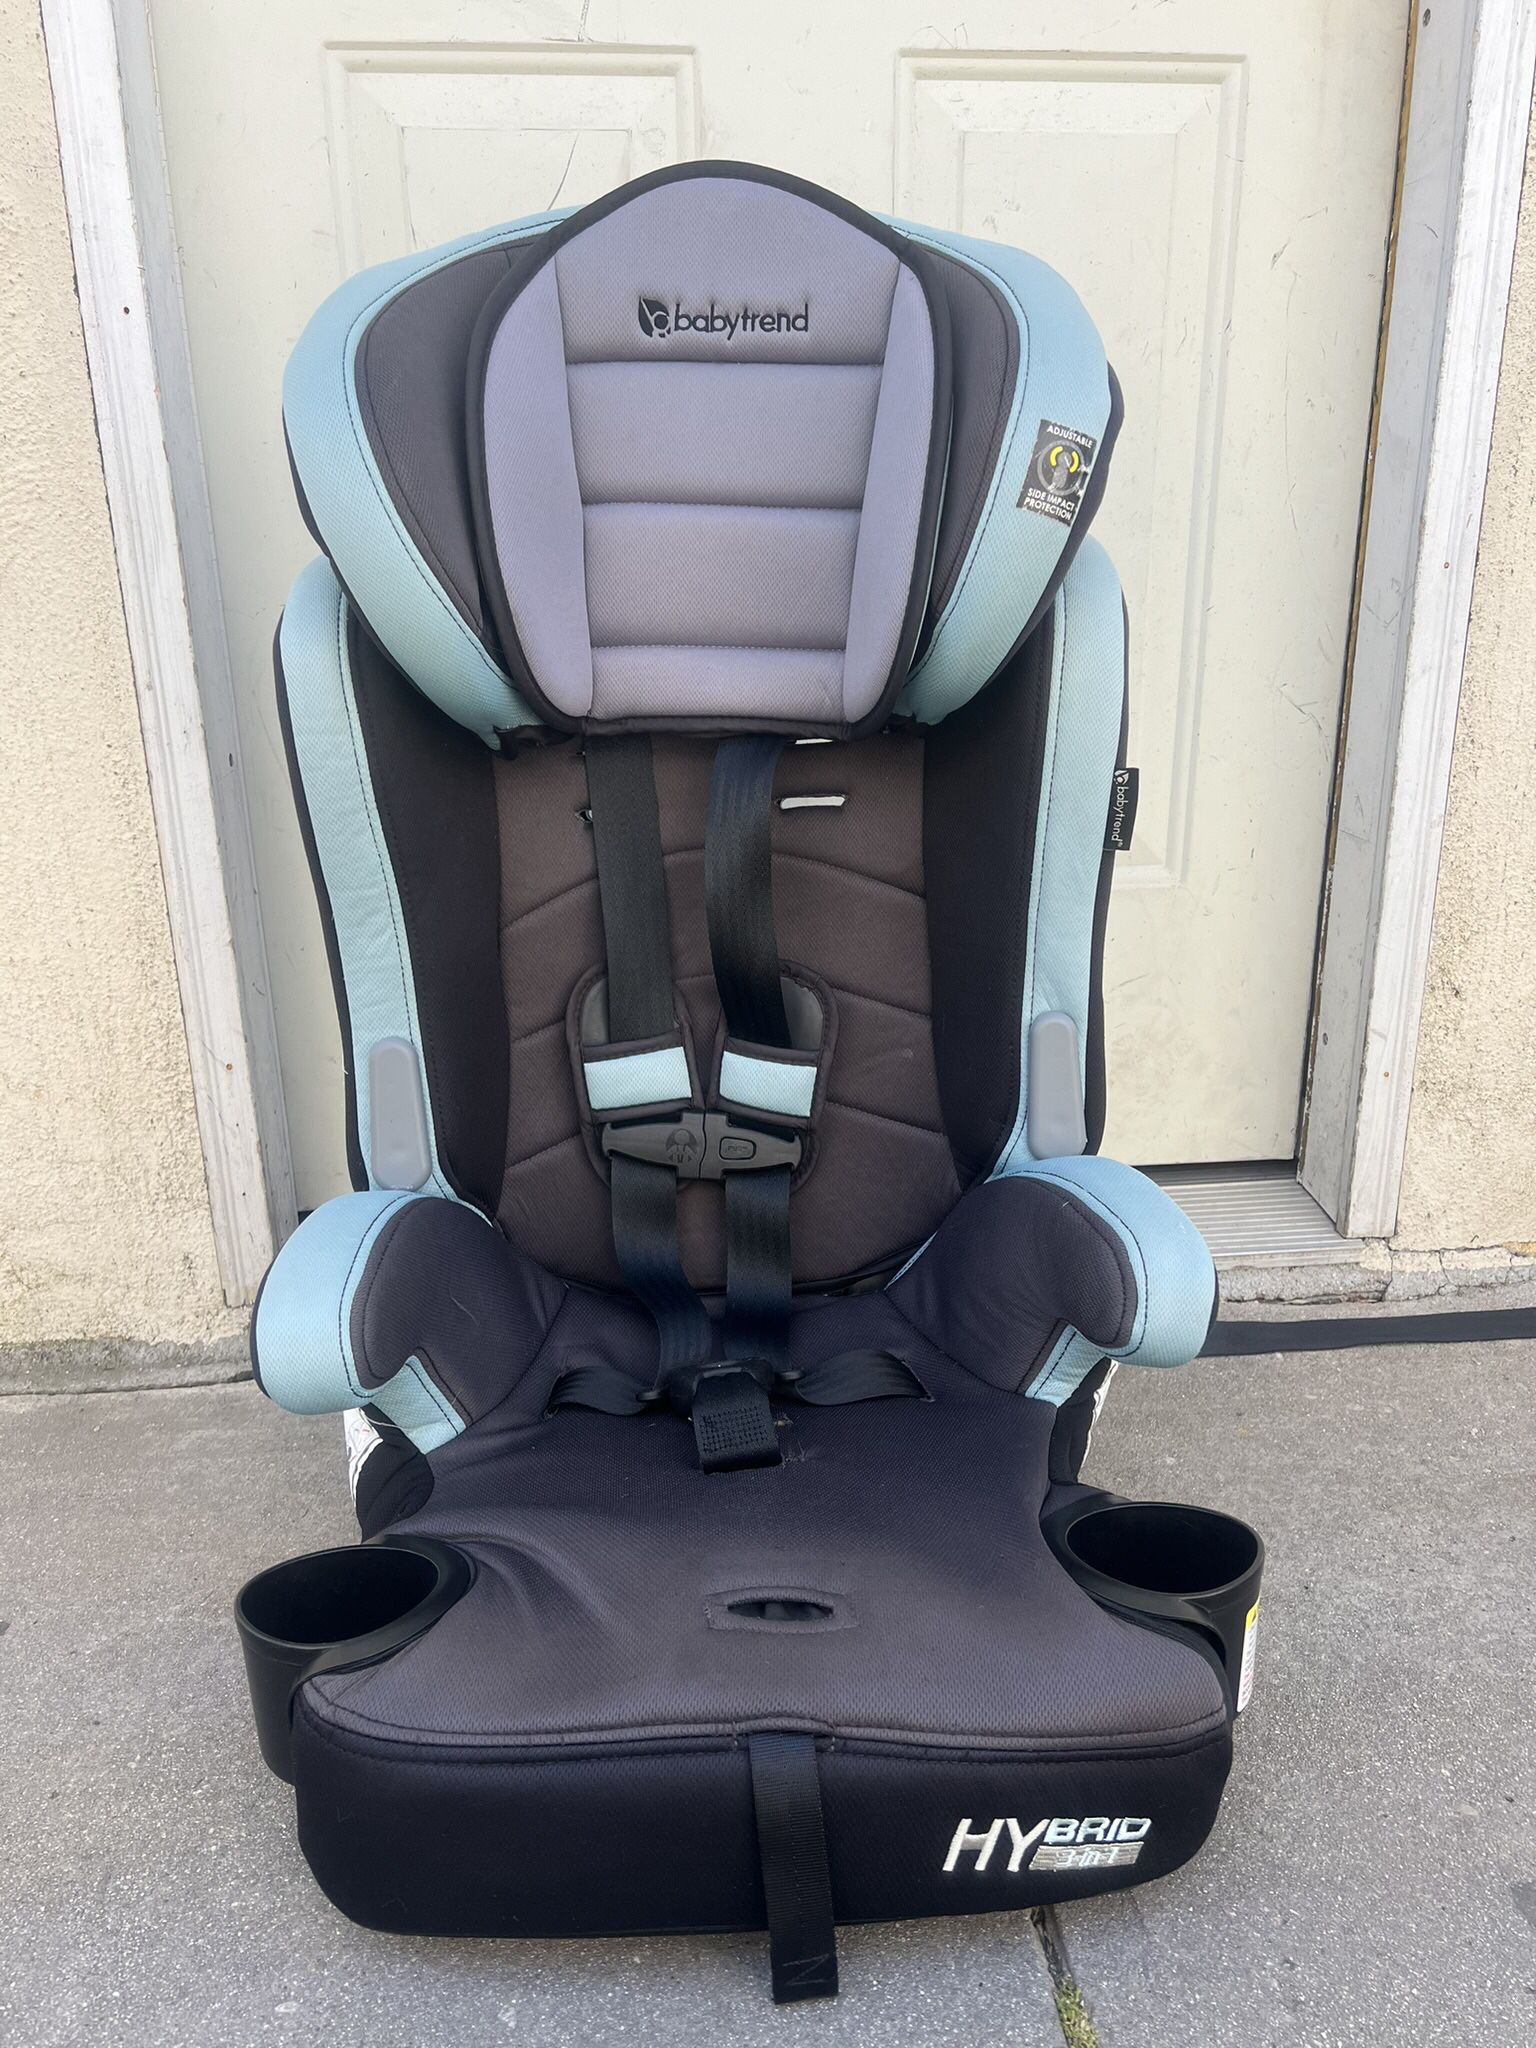 BABY TREND HYBRID BOOSTER SEAT 